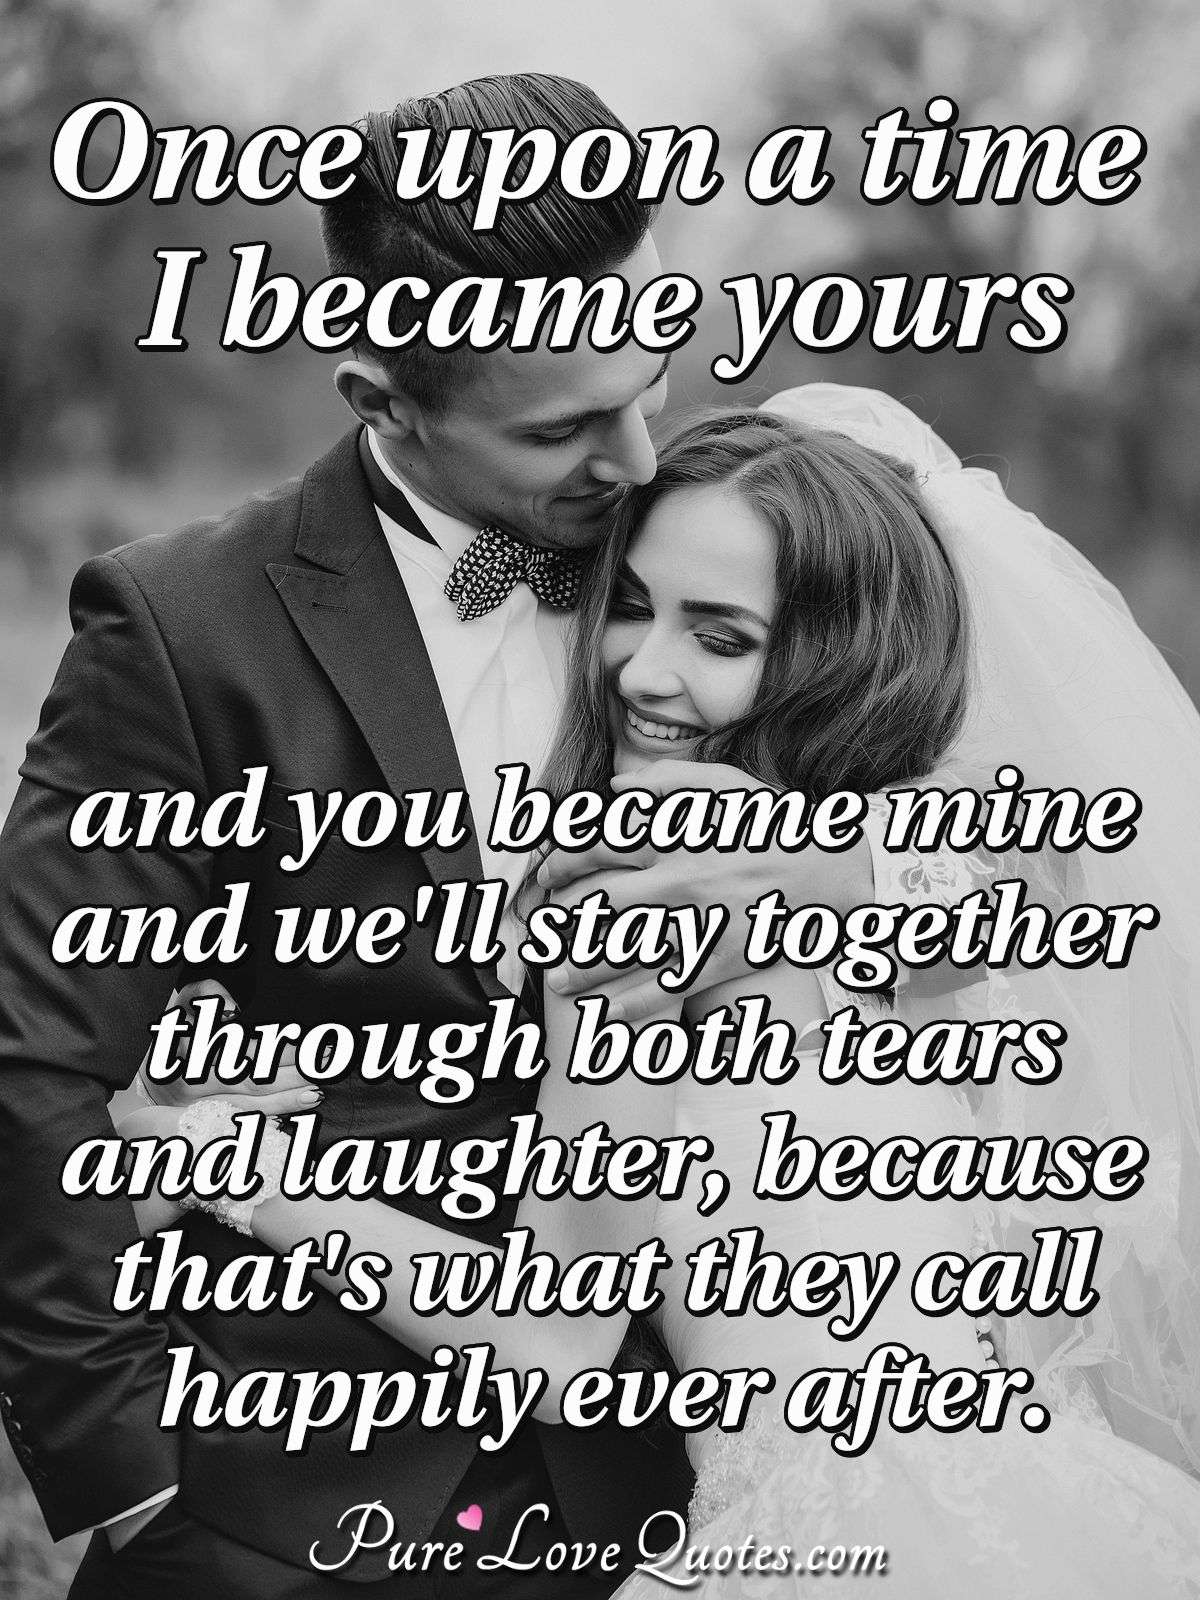 Once upon a time I became yours and you became mine and we'll stay together through both tears and laughter, because that's what they call happily ever after. - Anonymous